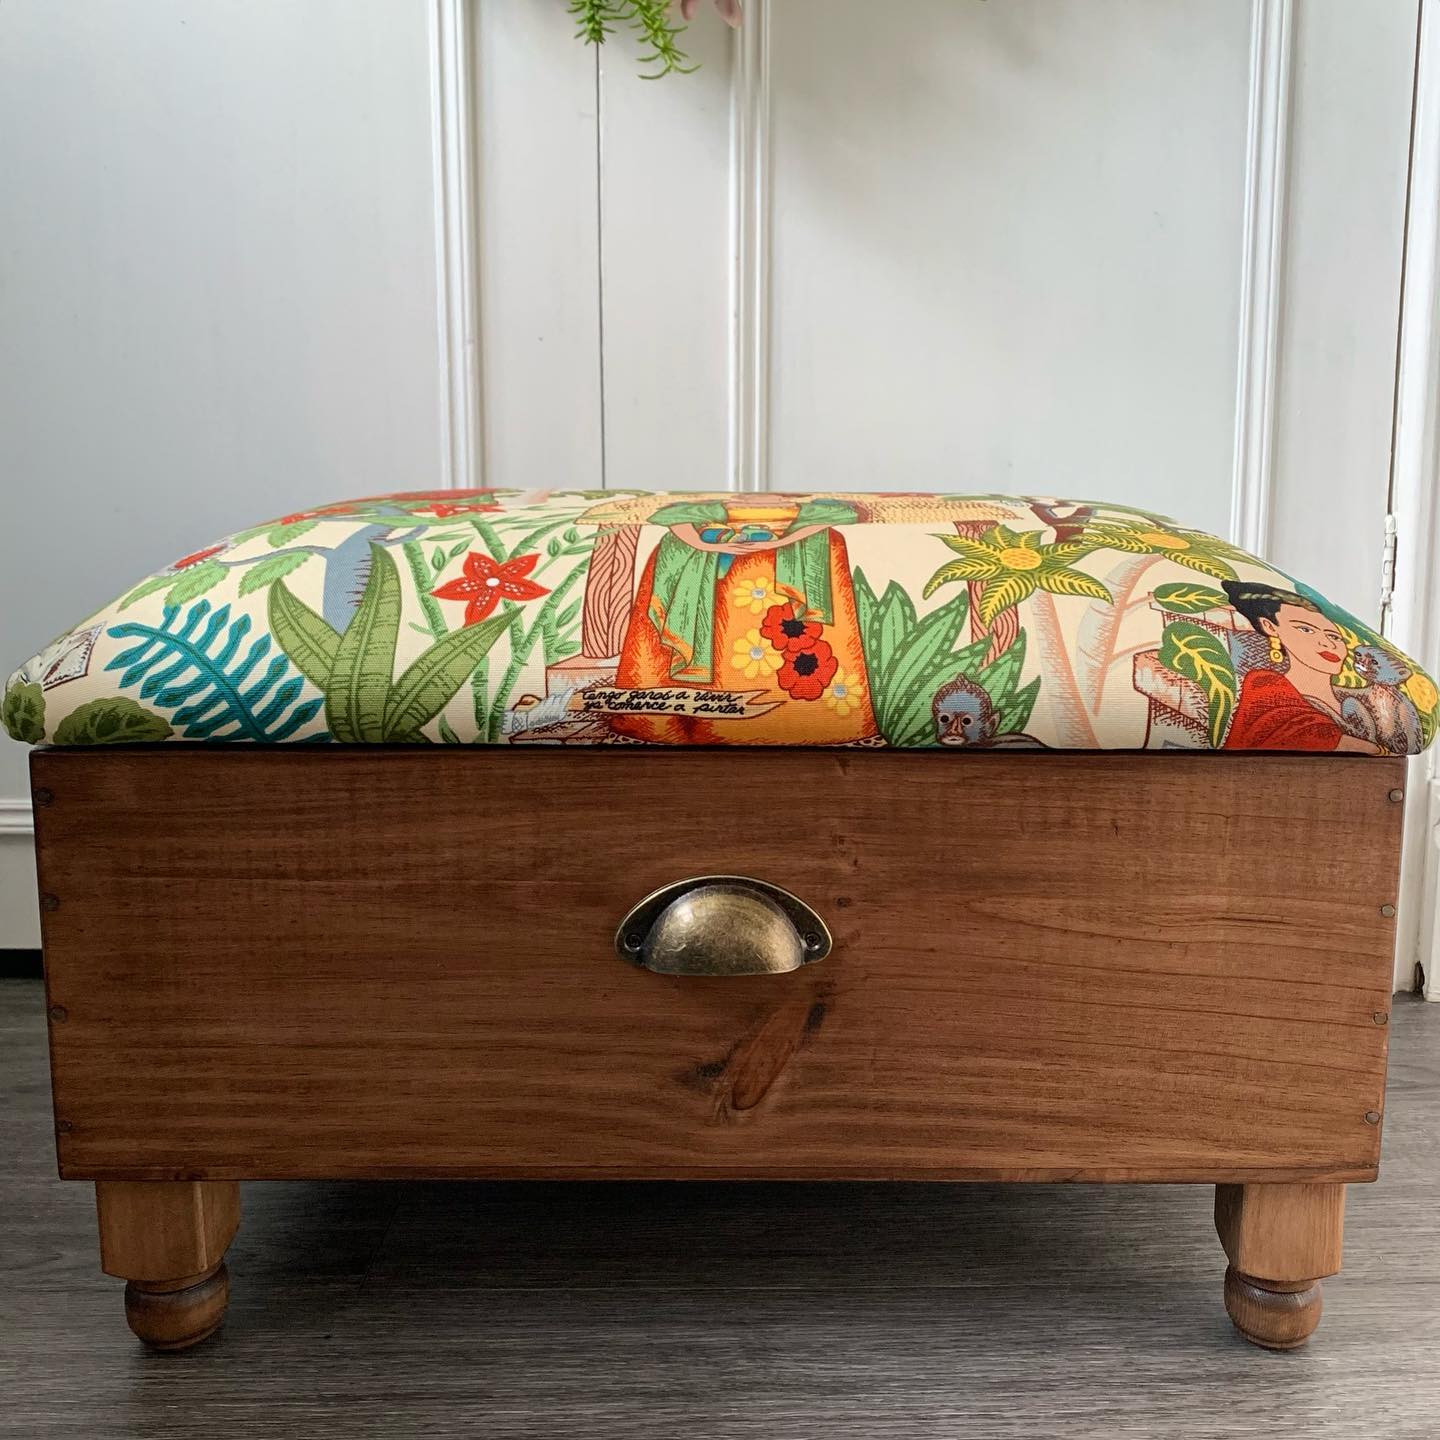 This gorgeous print is so cheerful! I can’t wait to make some more pieces with it. If you’re interested at all in a bespoke ottoman, feel free to get in touch or visit our website. This one is £99 plus shipping, prices start from £79 for our small boxes. #frida #garden #spring #beautifulfabric #livingroomdecor #homefurnishings #statementpiece #home #bespoke #shophandmade